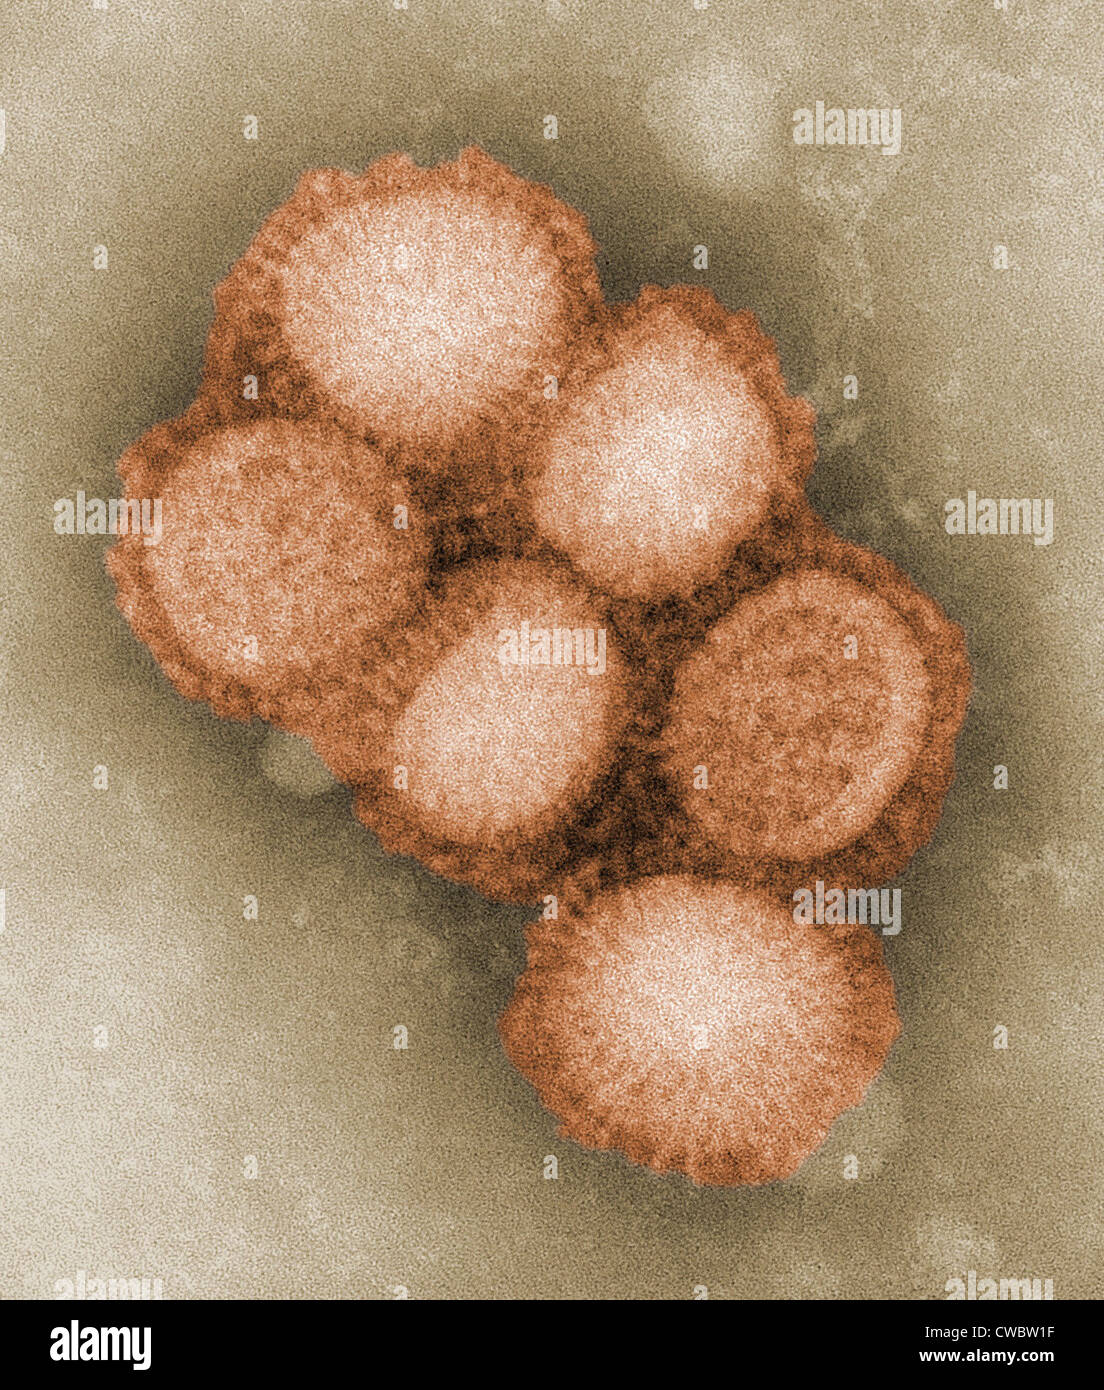 Swine flu virus. Colorized negative stained transmission electron micrograph. Photo by C. S. Goldsmith and A. Balish, 2009. Stock Photo